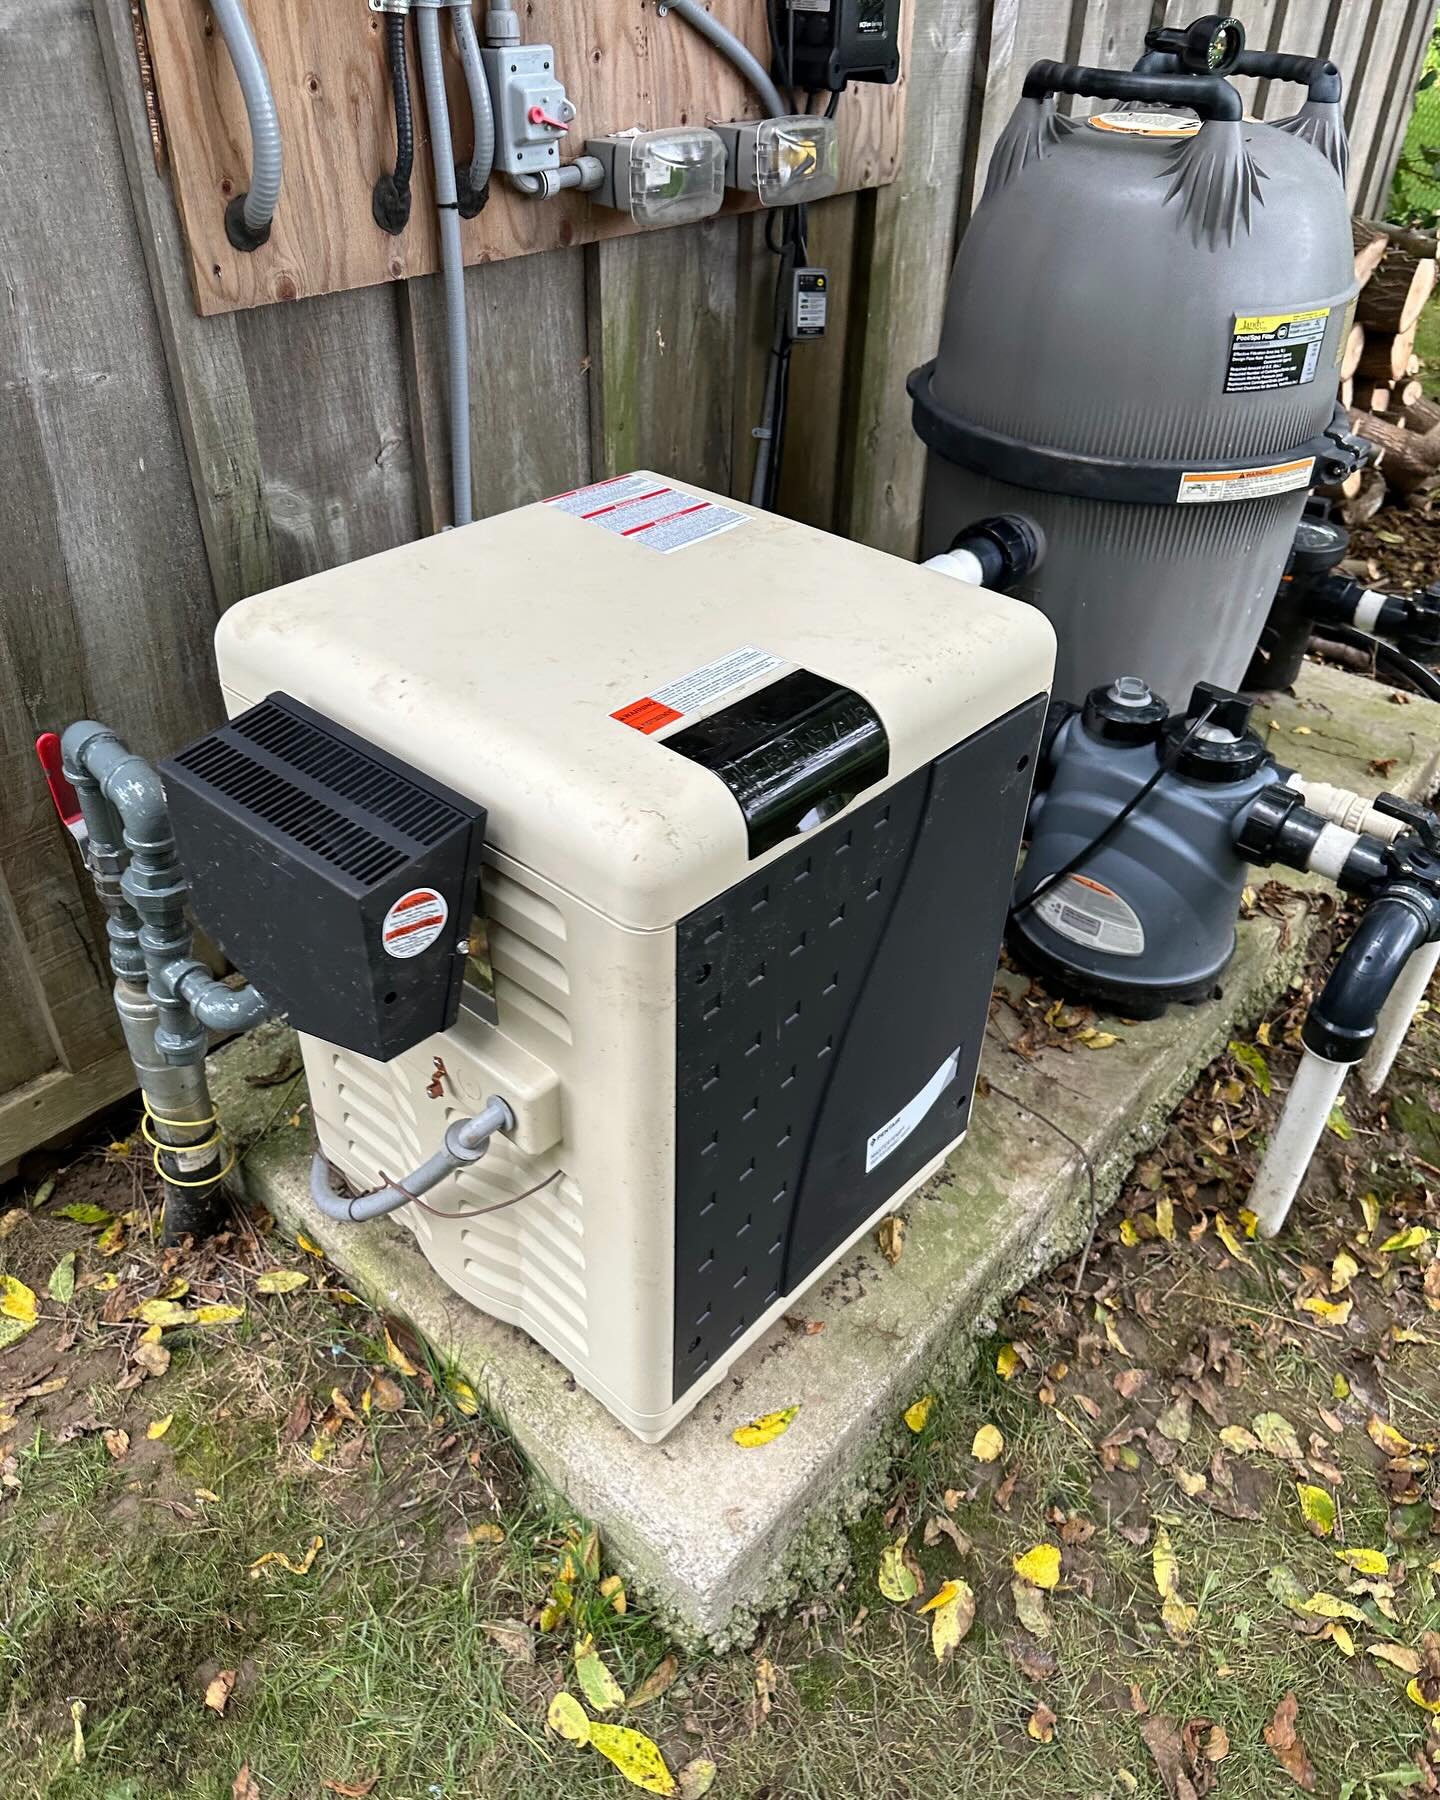 Out with the old. In with the new! SWIPE to see the old ➡️

Pool Heater Installation &amp; Maintenance Services Available. All Types &amp; Models.

Call us today! 

 (905) 541-5888 
www.beyondthesite.ca

#beyondthesite #onsite #BTS #jobsite #construc